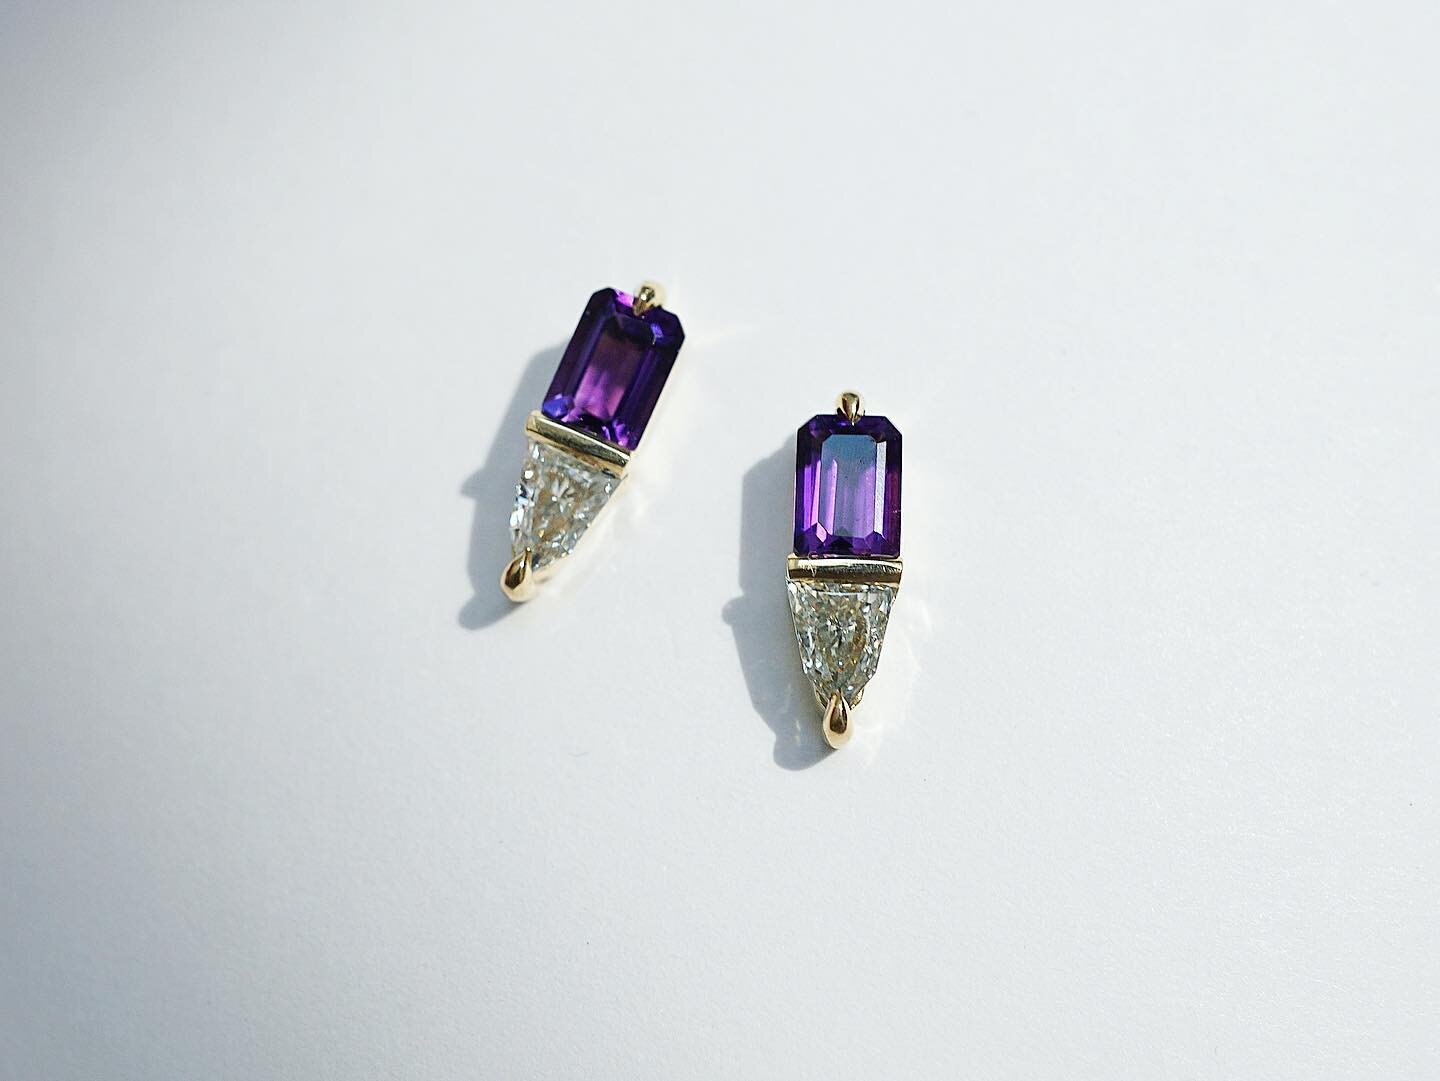 Candy studs 🍬 sweet amethyst and brilliant bullets, set in buttery yellow gold, honored to be commissioned and to create these for family.
💜 @marchstephanie